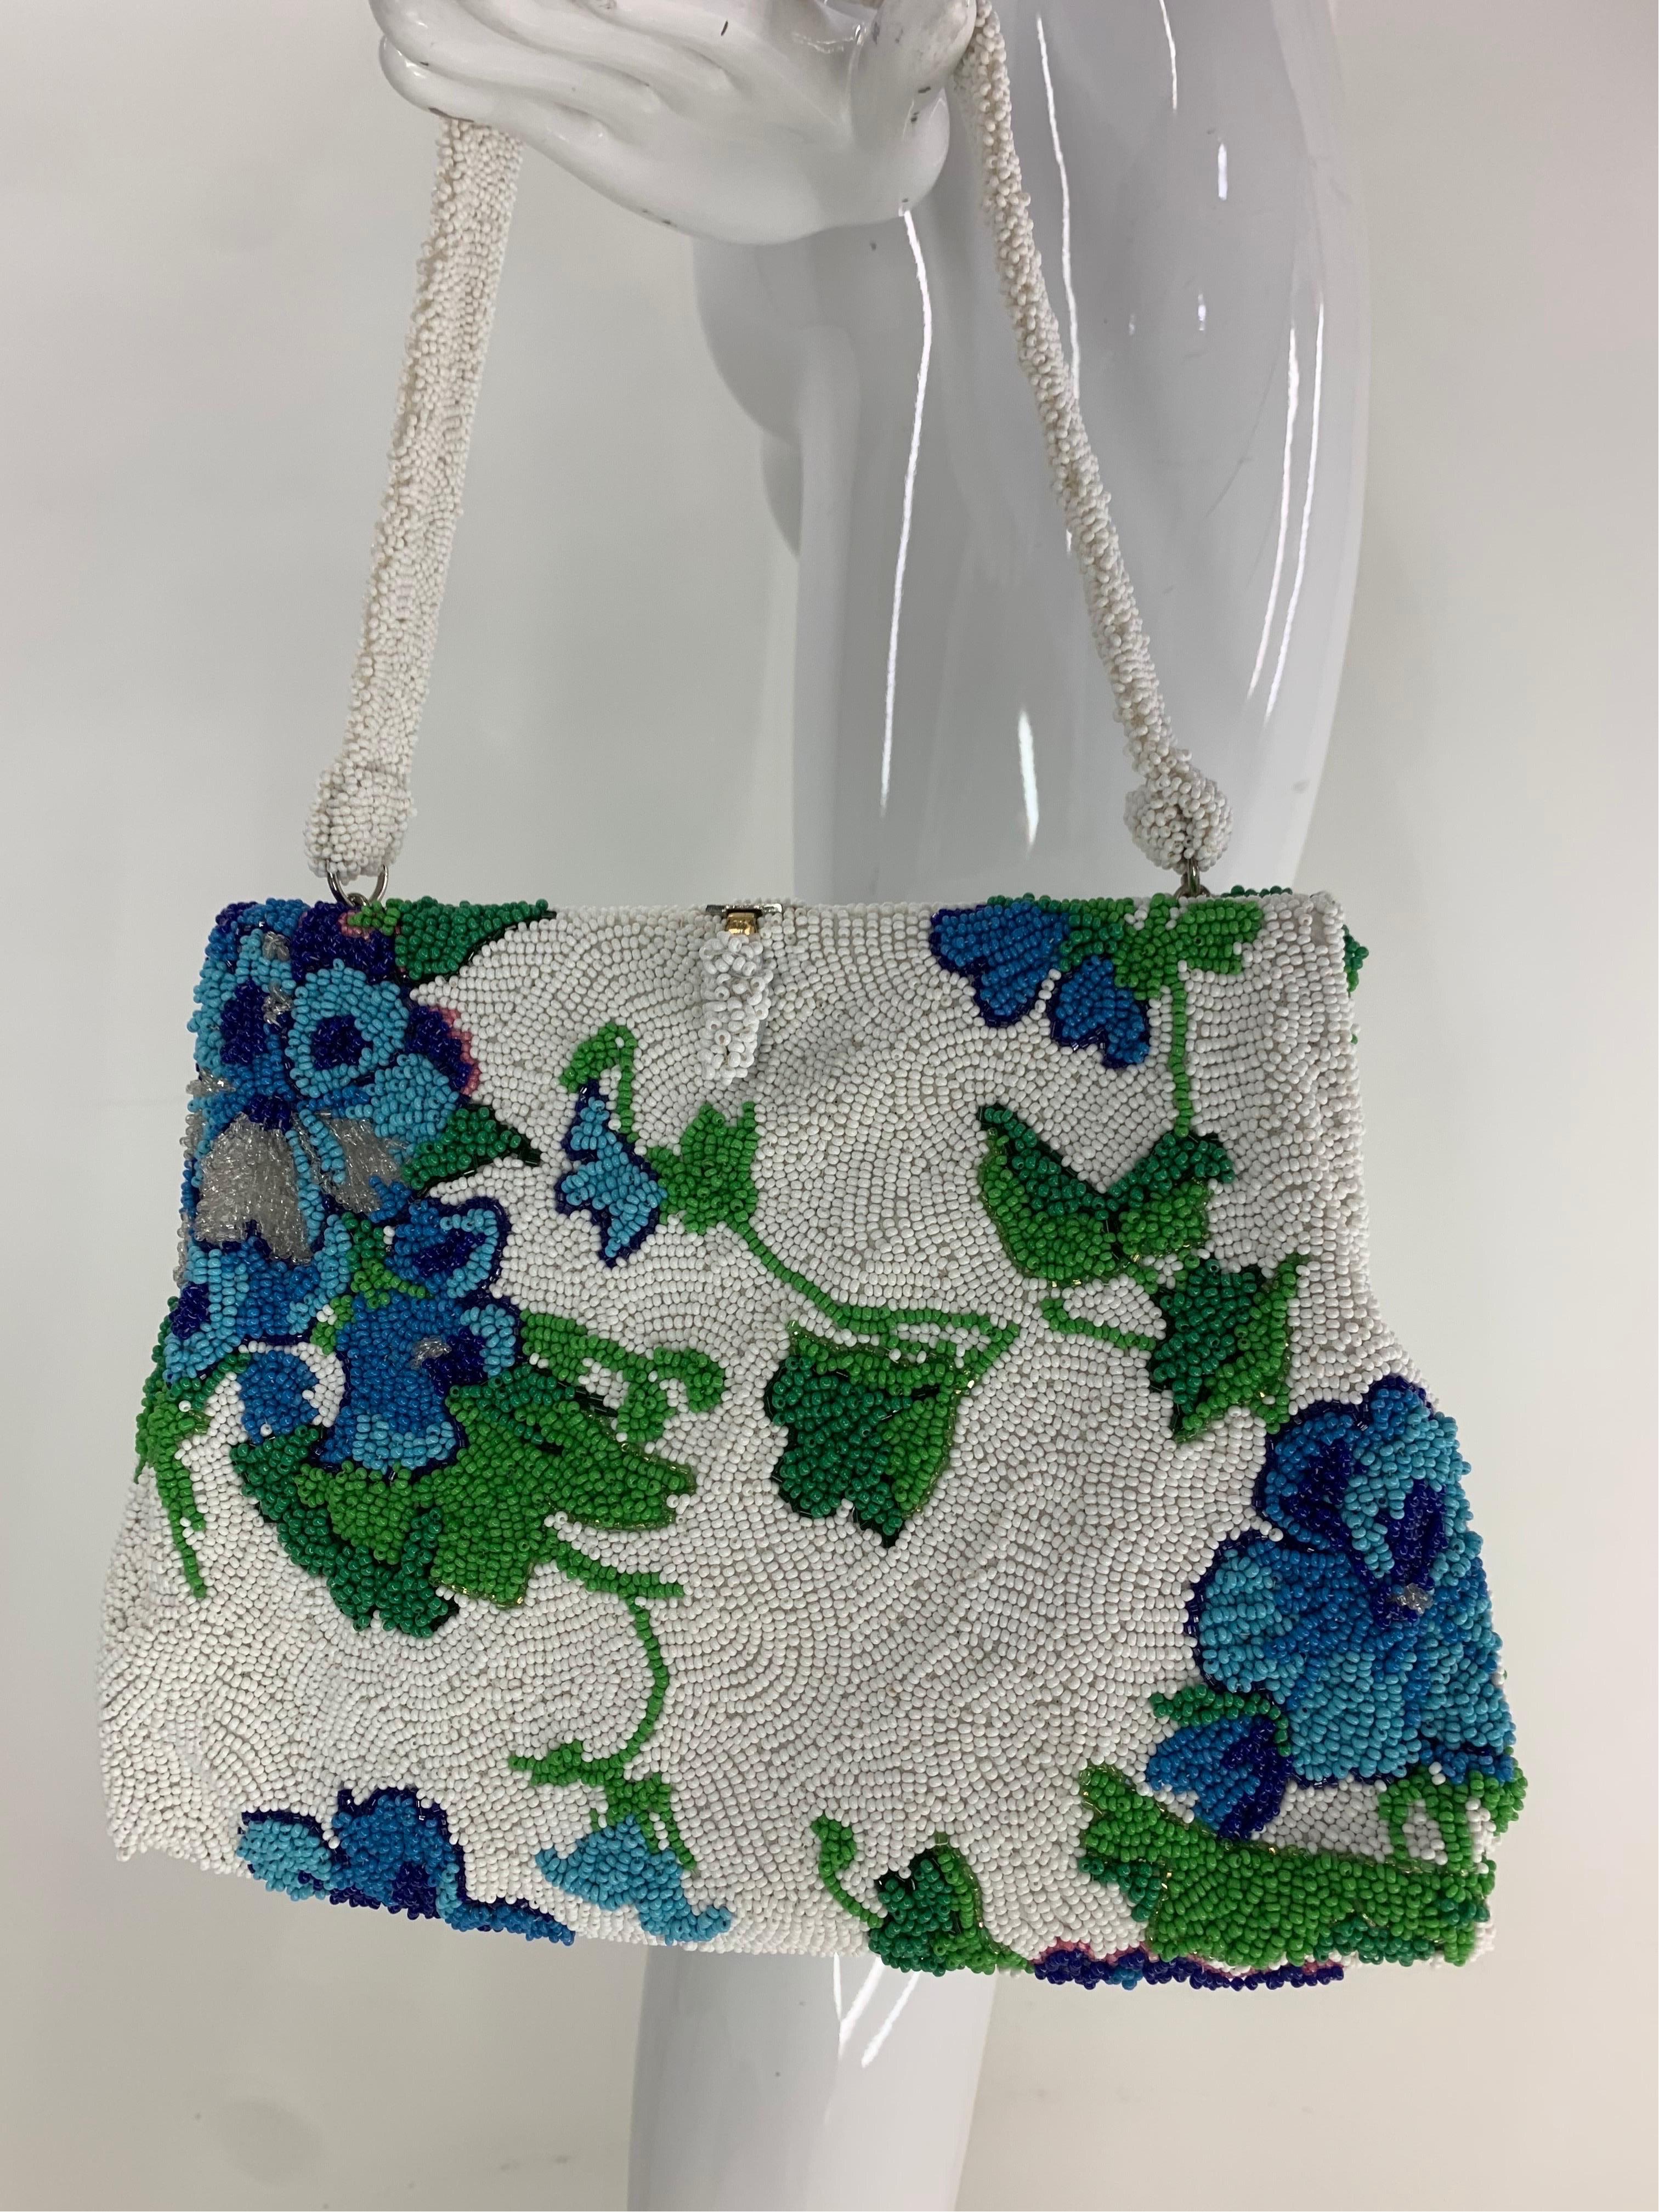 1950 Koret Tresor Stunning Floral Beaded Handbag In Green & Blue On White Background. Absolutely charming and a very functional size handbag by one of the highest quality makers of the period. 